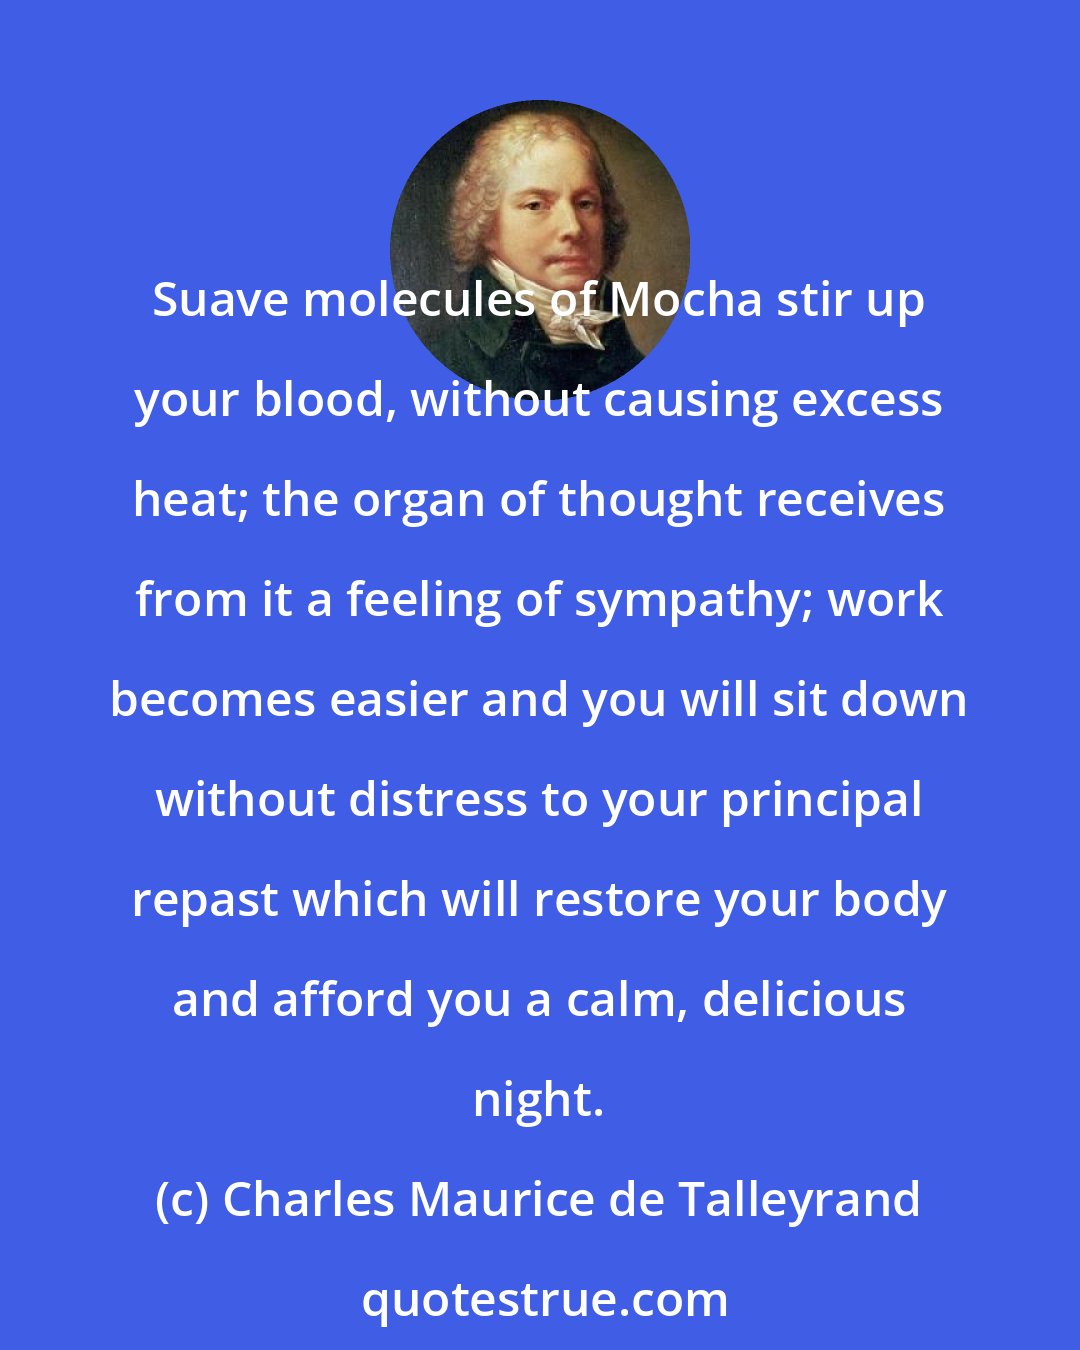 Charles Maurice de Talleyrand: Suave molecules of Mocha stir up your blood, without causing excess heat; the organ of thought receives from it a feeling of sympathy; work becomes easier and you will sit down without distress to your principal repast which will restore your body and afford you a calm, delicious night.